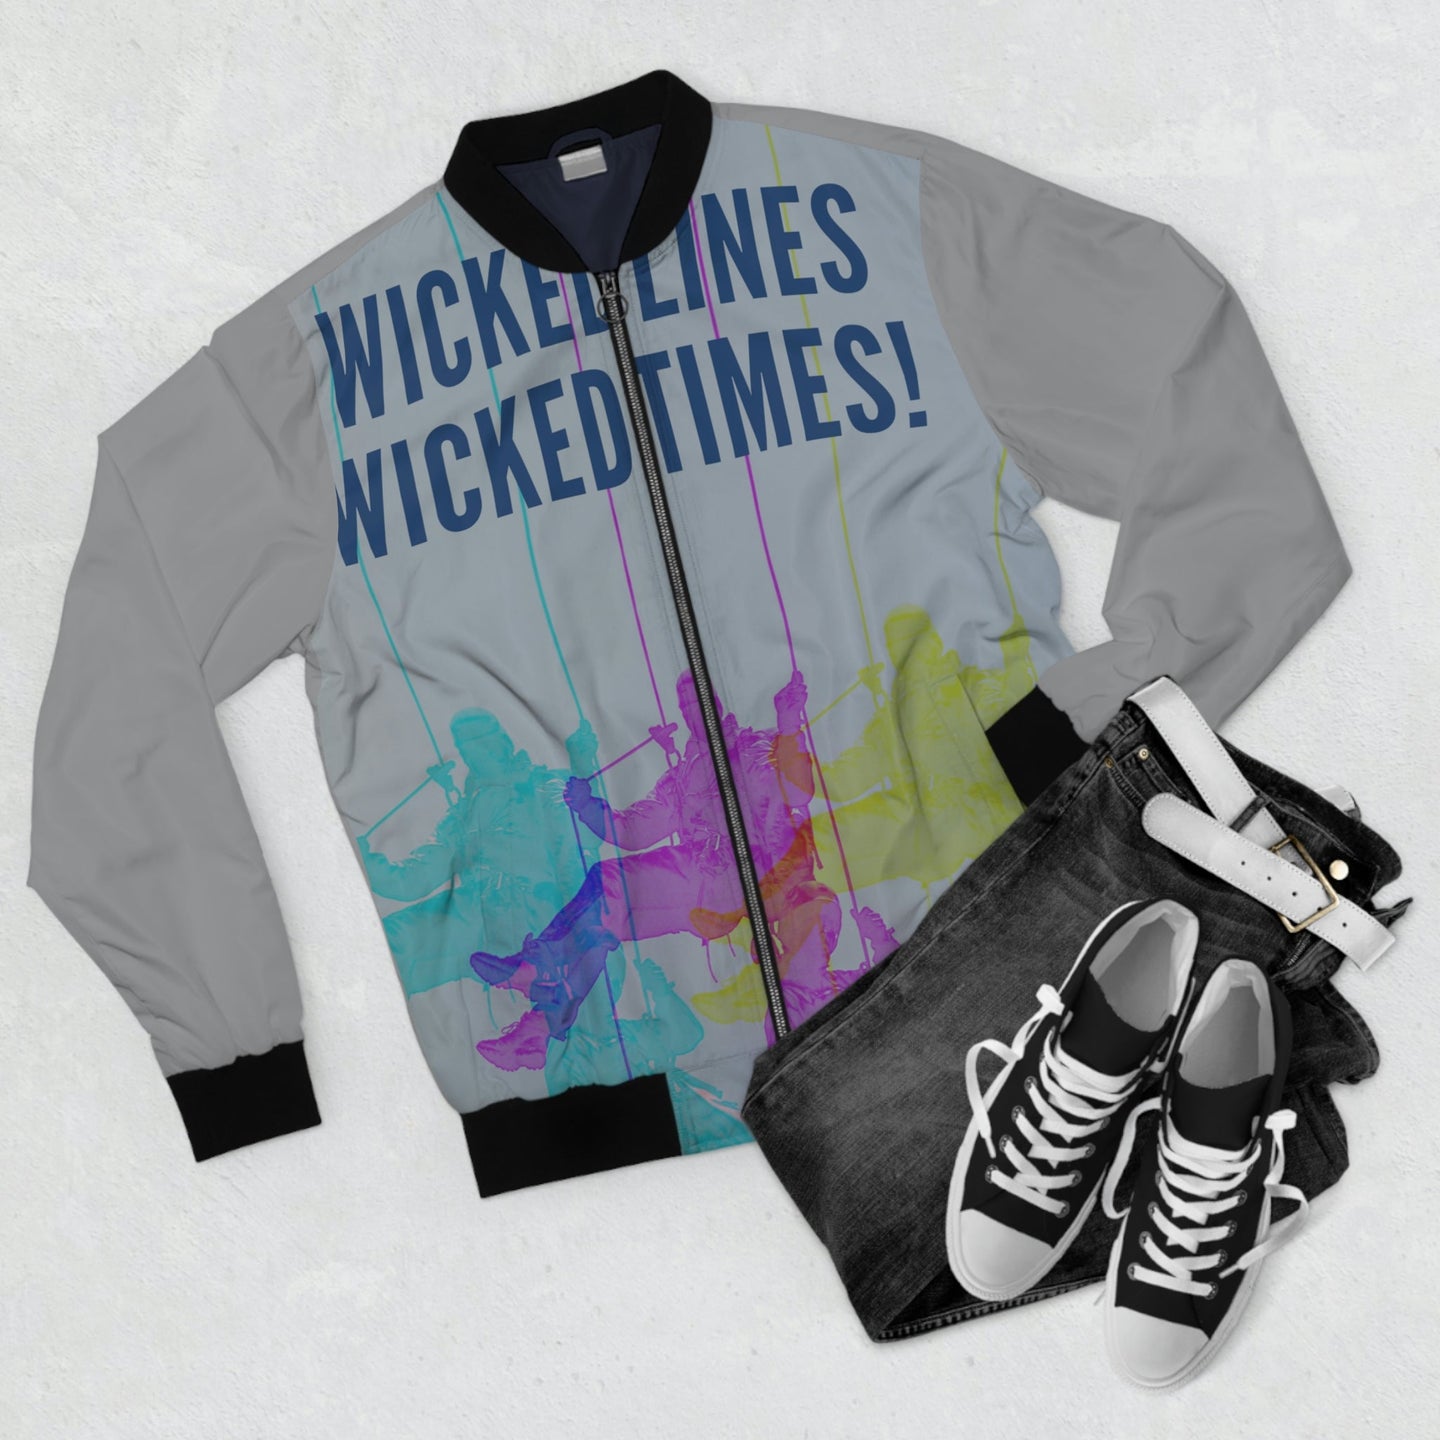 Wicked Times Men's Bomber Jacket